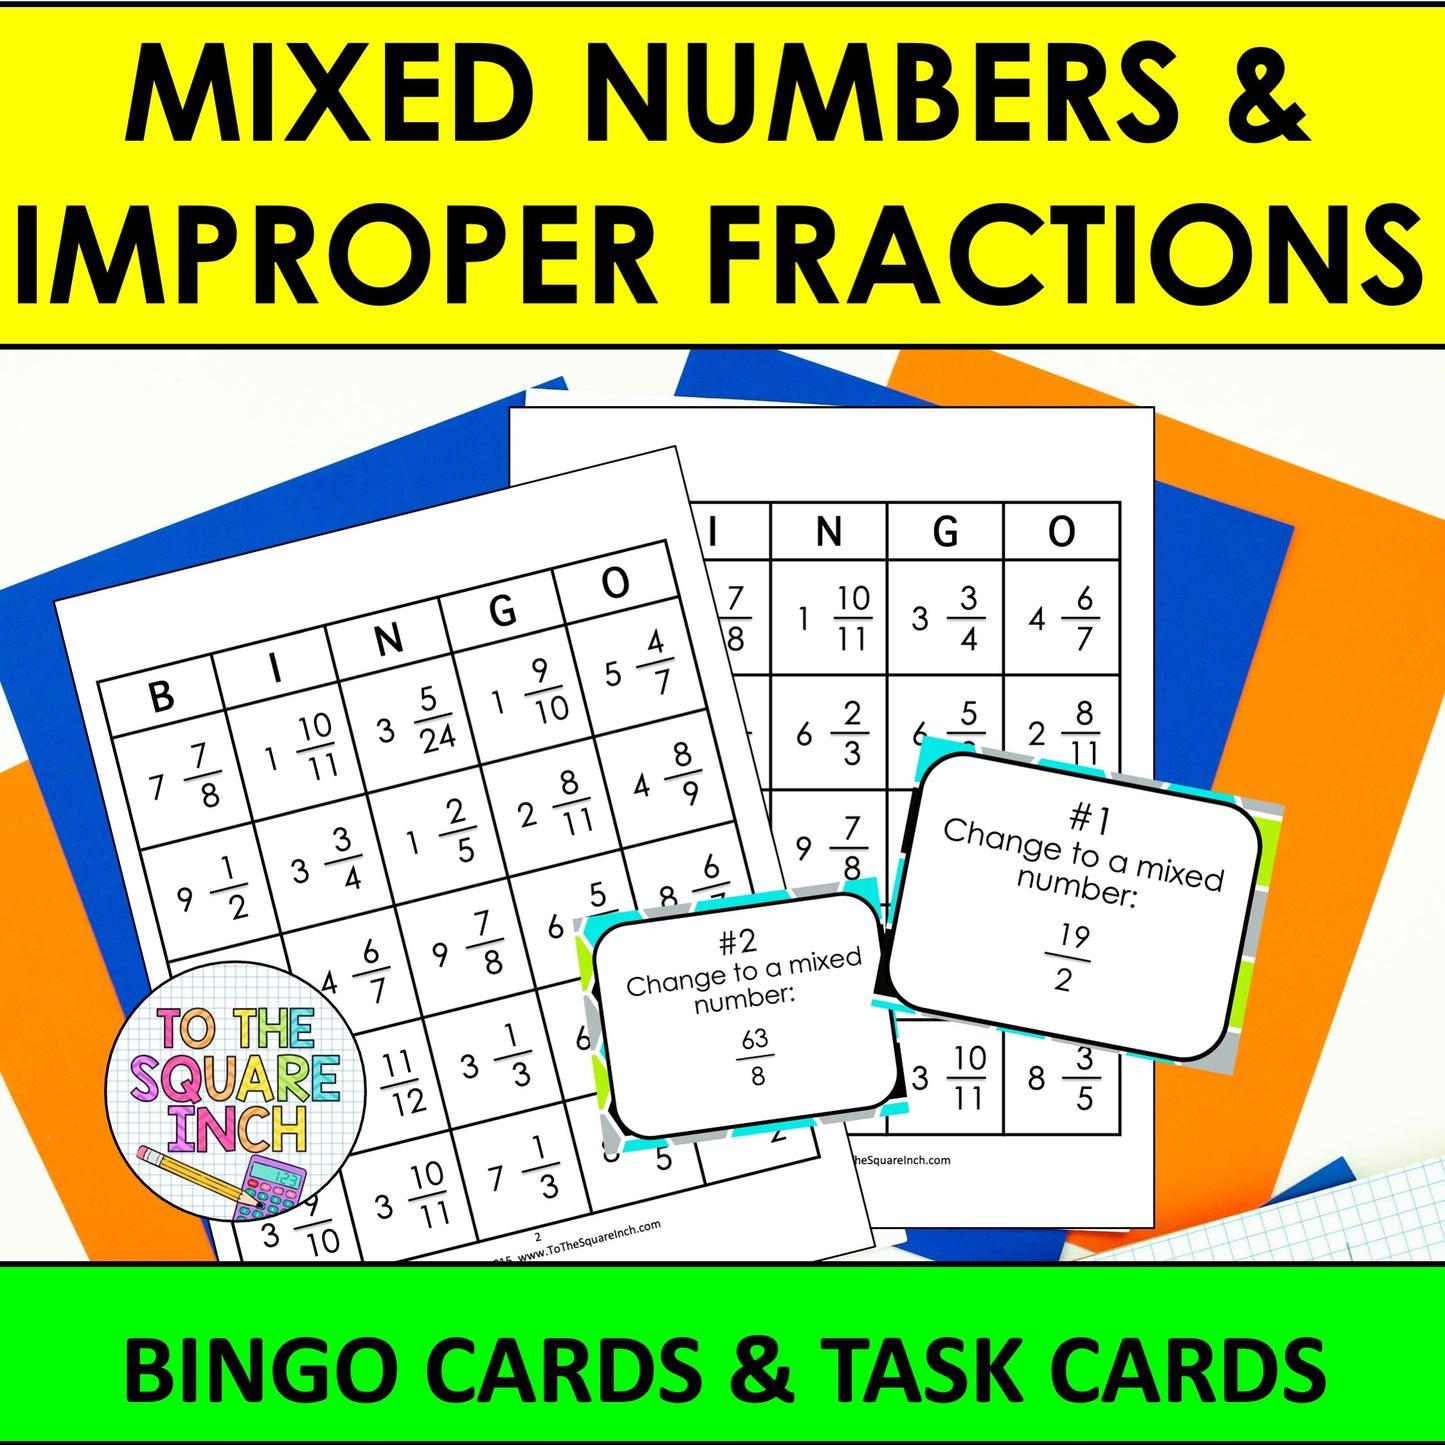 Mixed Numbers and Improper Fractions Bingo Game